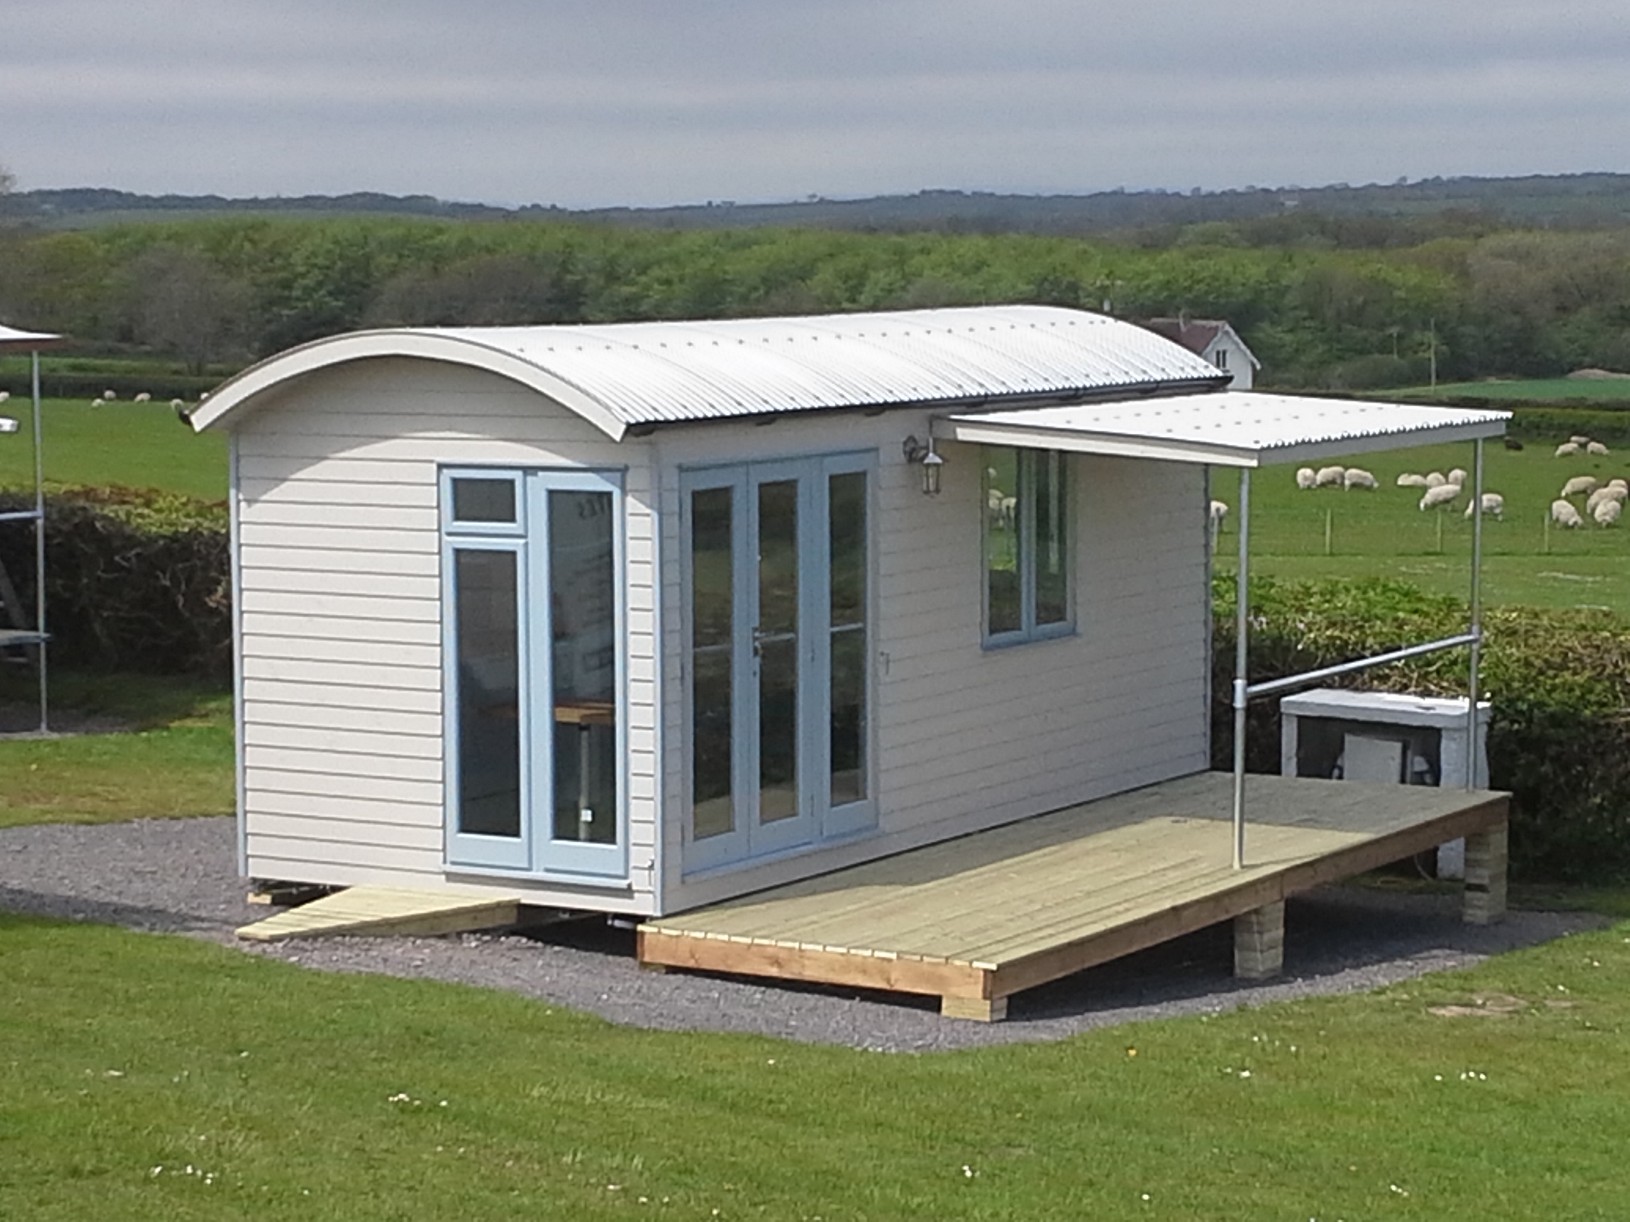 Mobile log cabins glamping pods shepherds huts